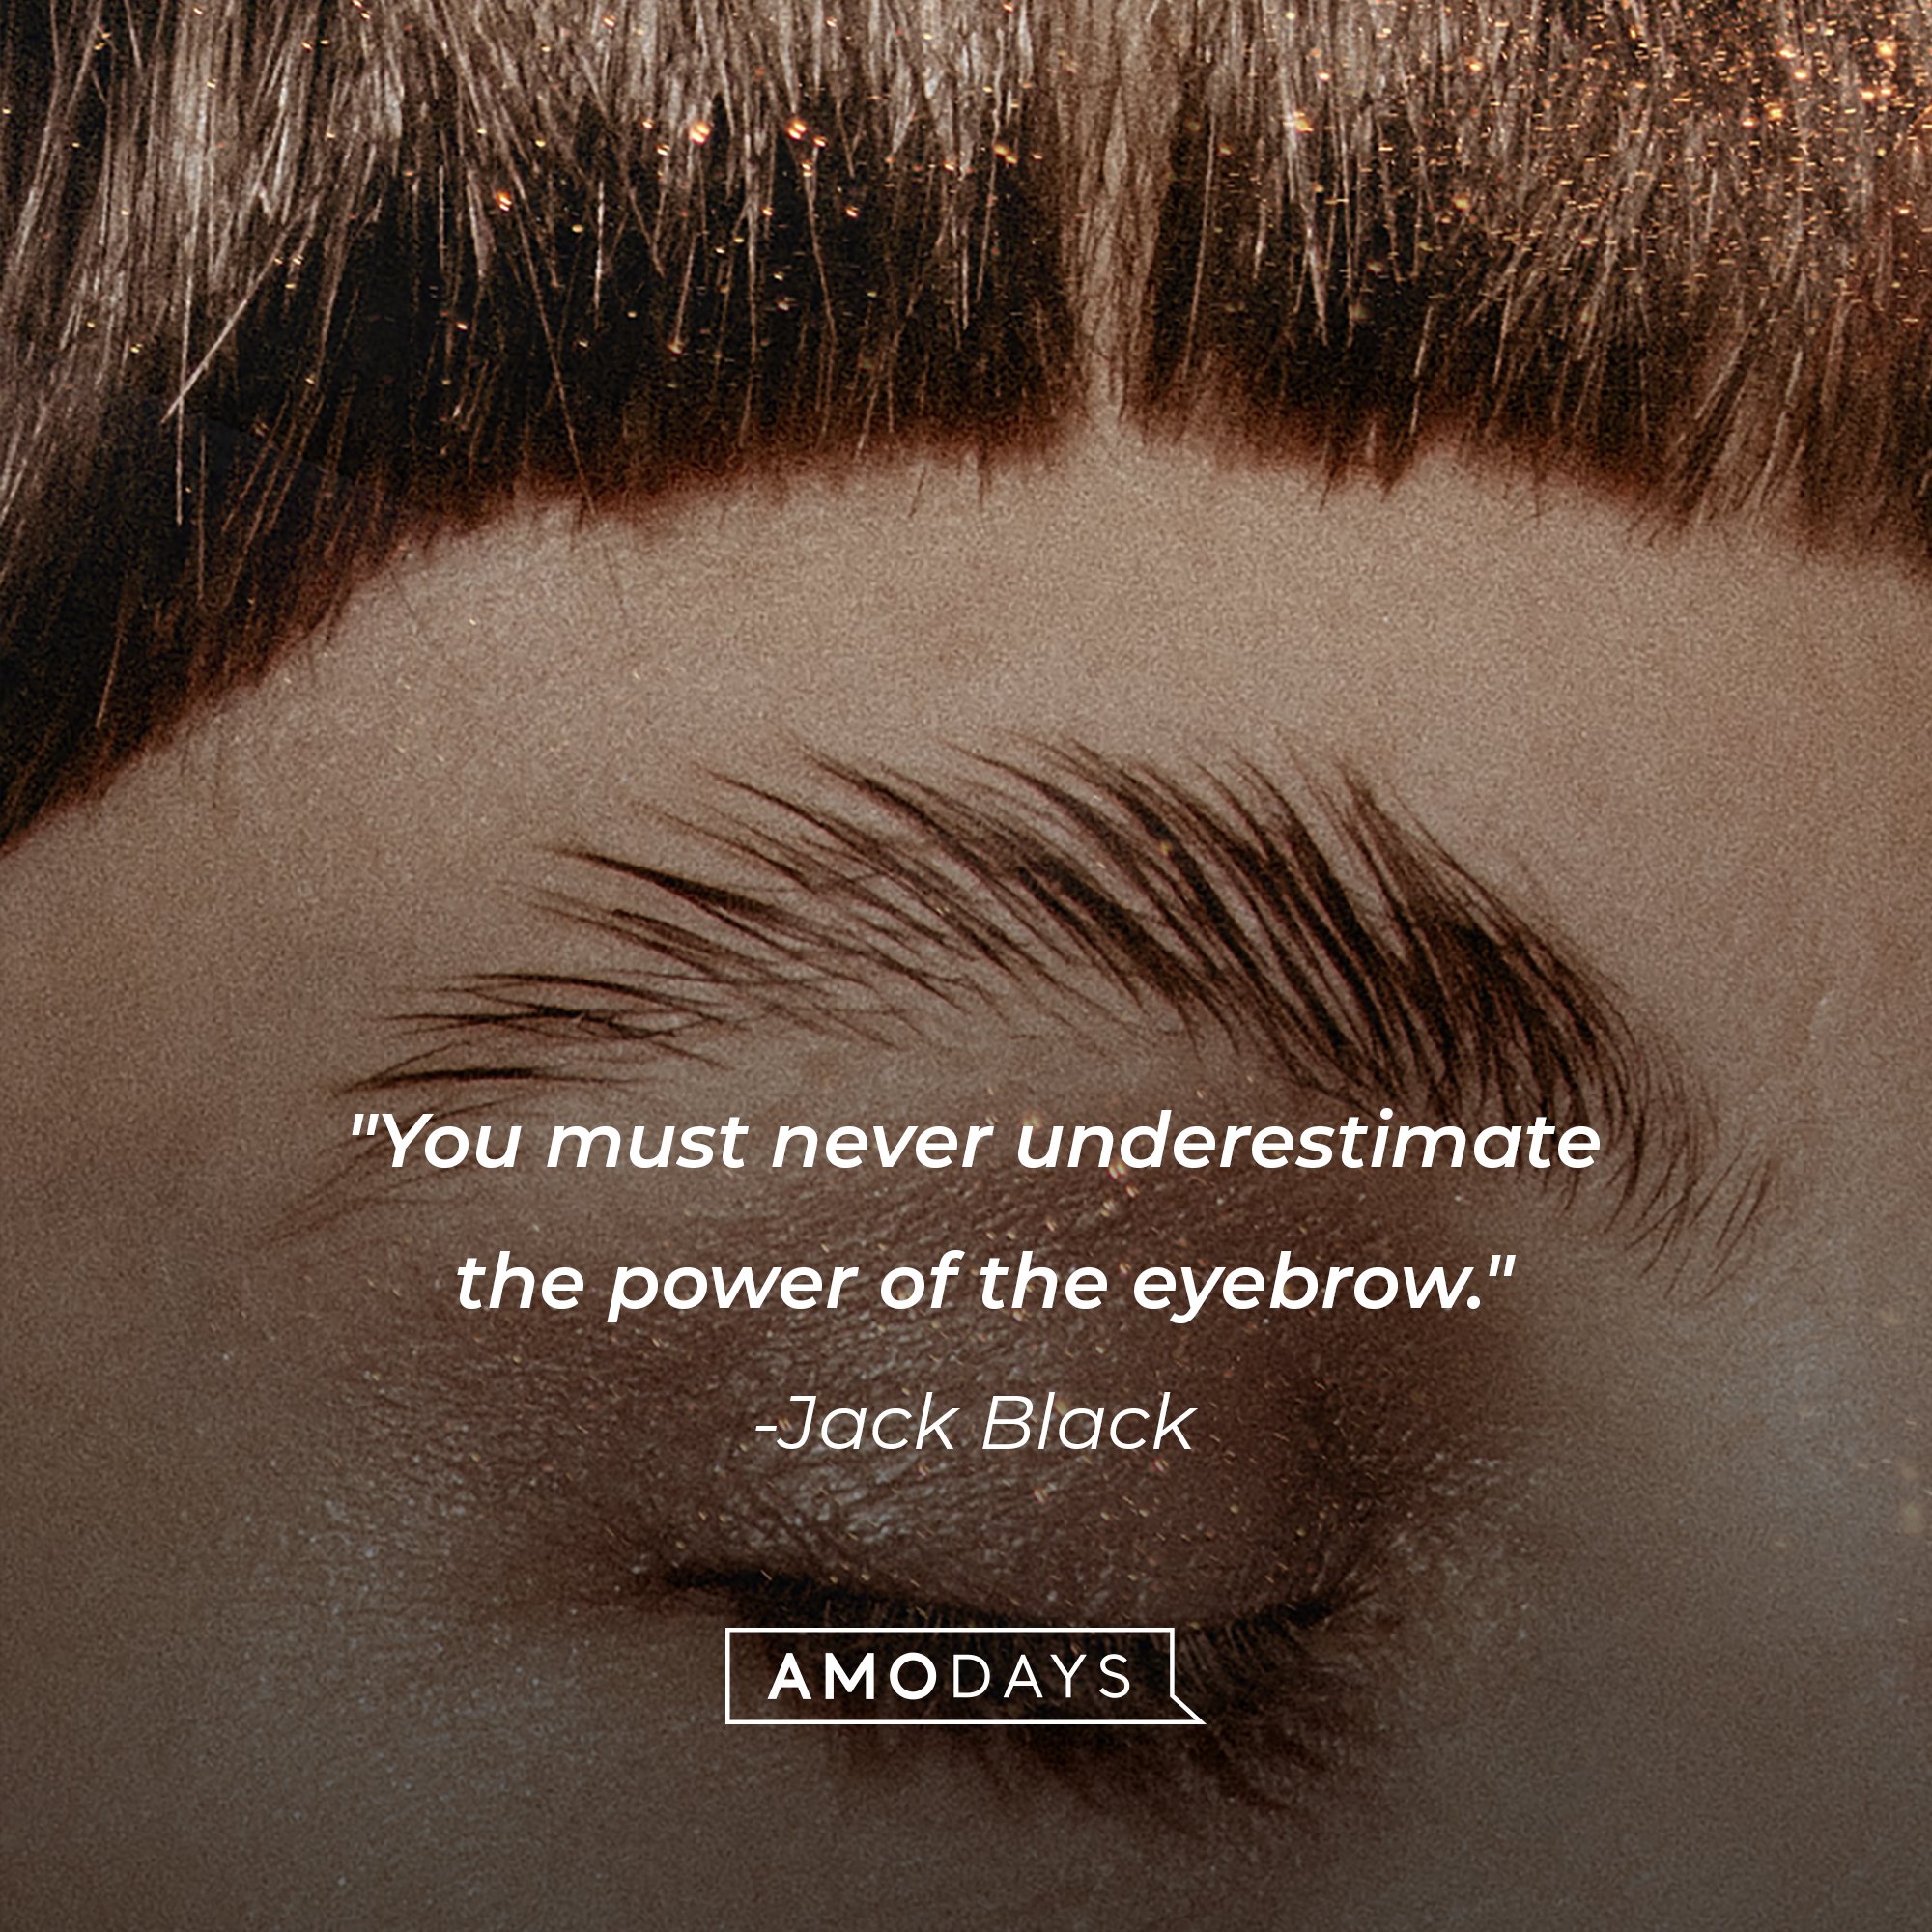 Jack Black’s quote: "You must never underestimate the power of the eyebrow." | Image: AmoDays